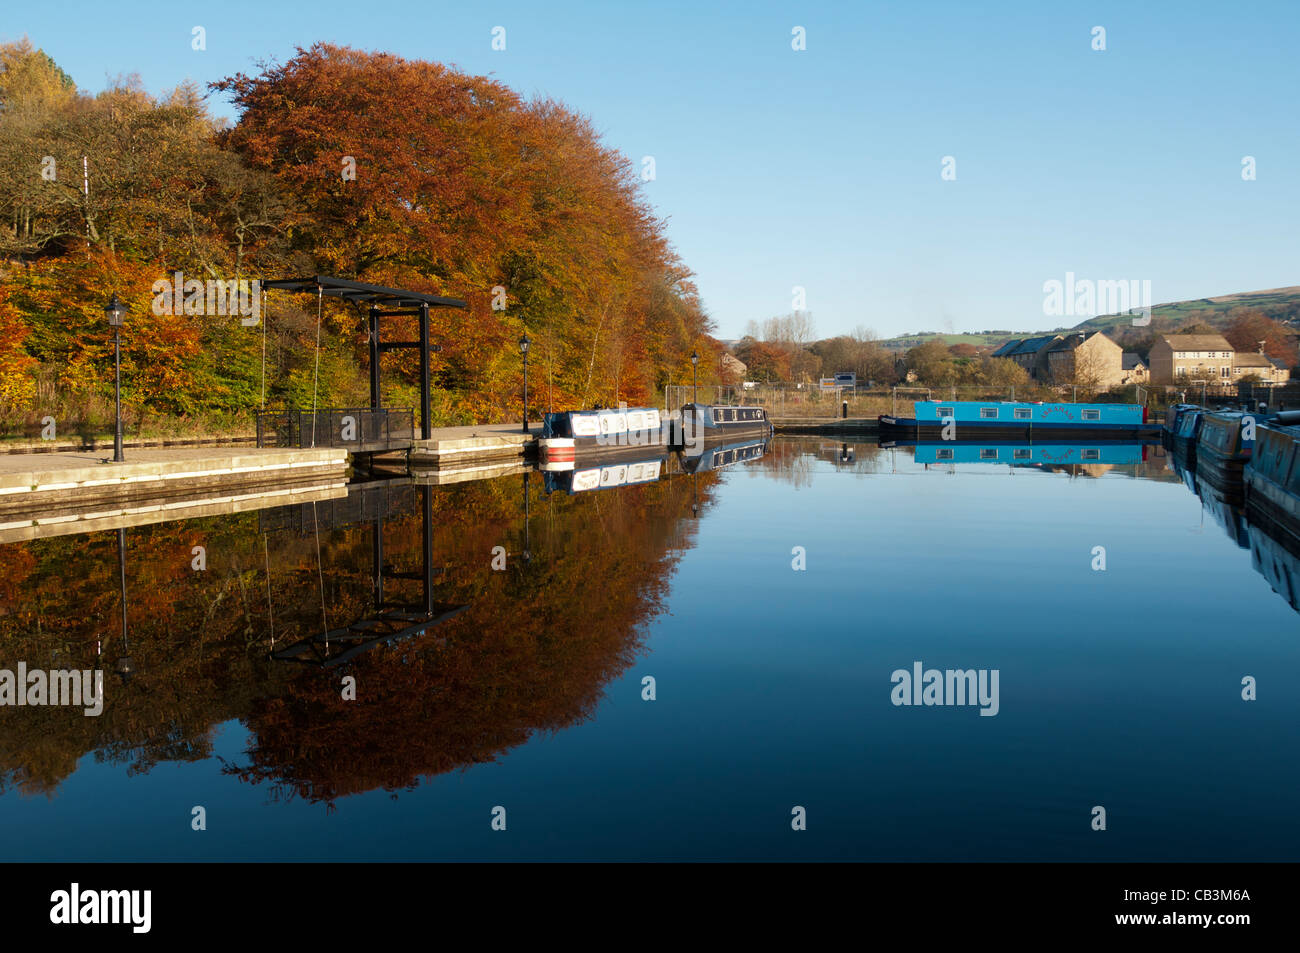 An autumn scene at Frenches Marina on the Huddersfield Narrow canal at Greenfield, Saddleworth, Greater Manchester, UK. Stock Photo